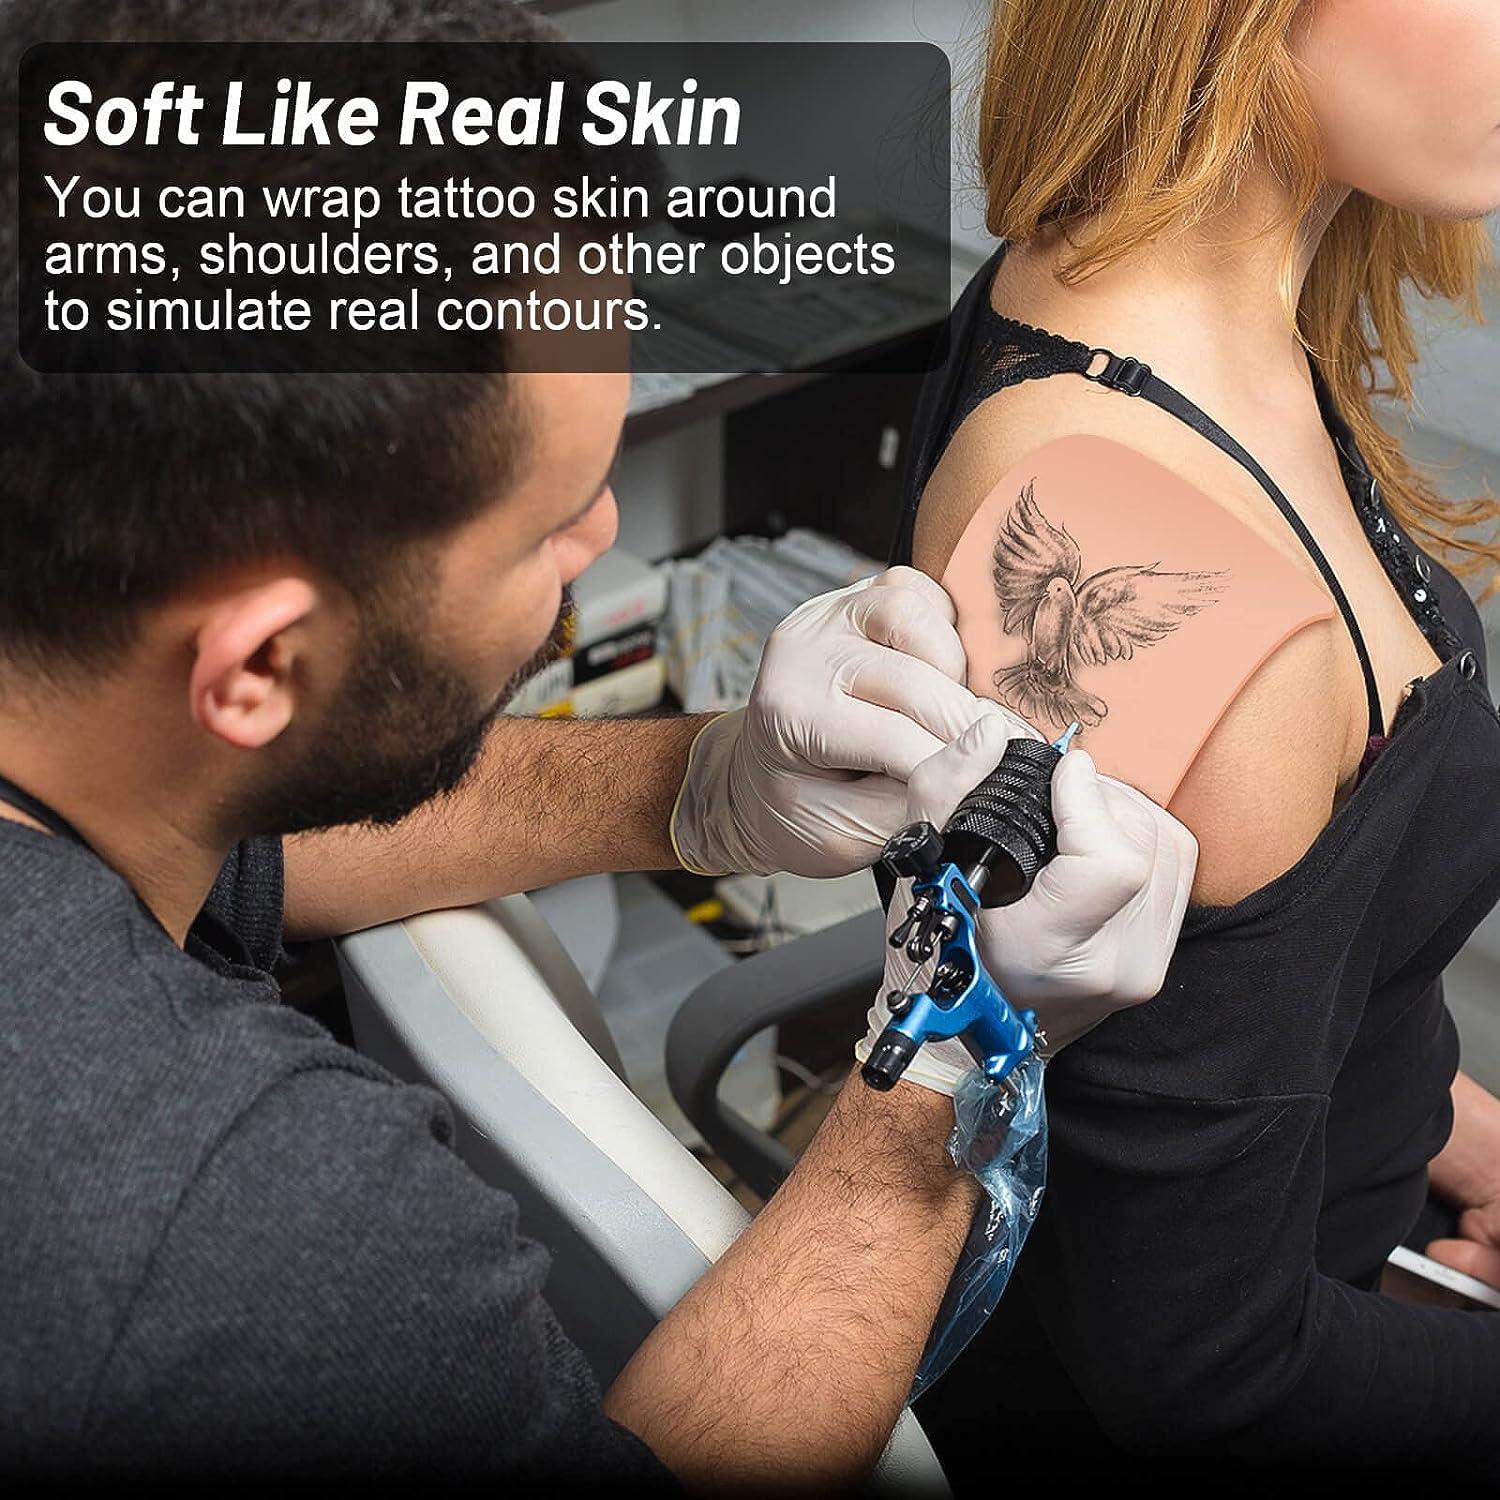 Does Tattooed Skin Have Different Moisturizing Needs?